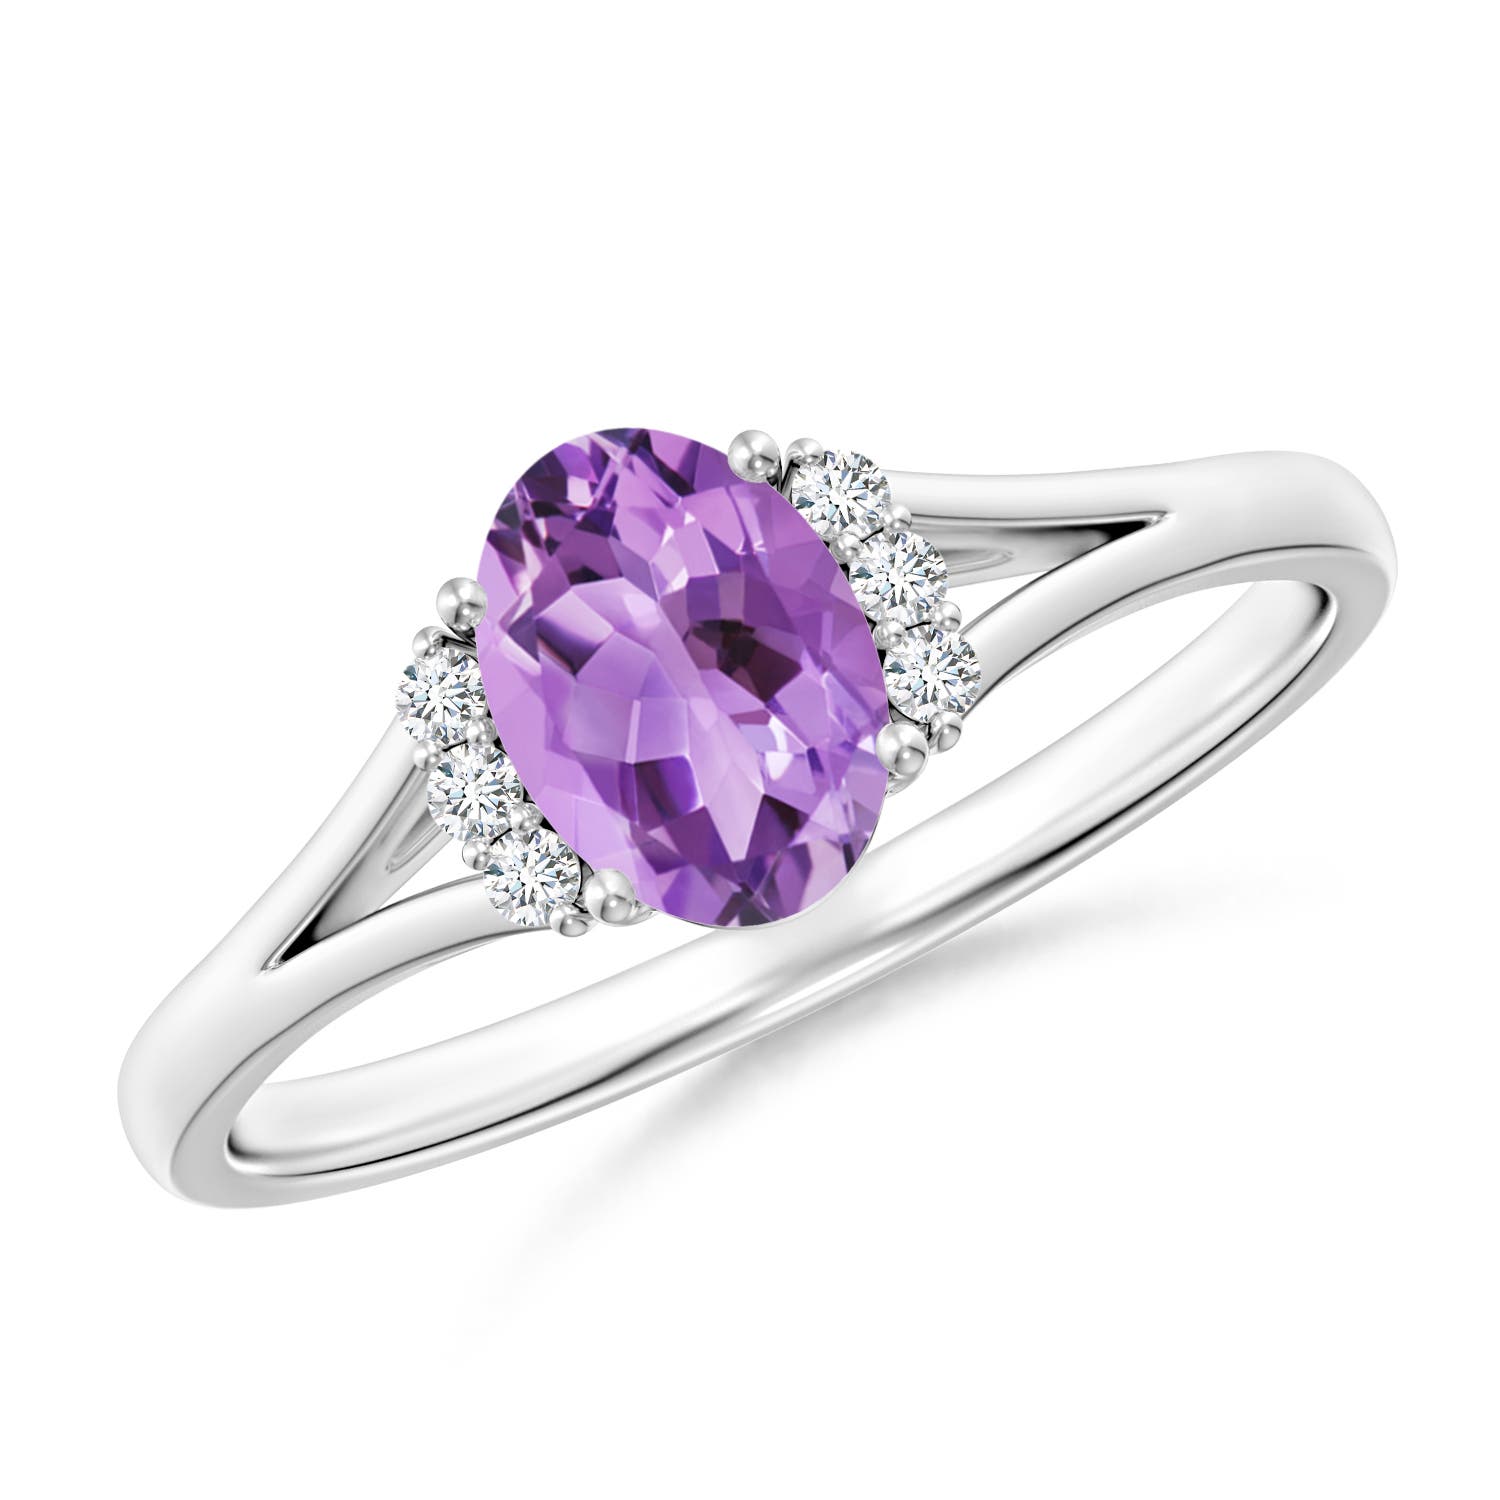 A - Amethyst / 0.77 CT / 14 KT White Gold